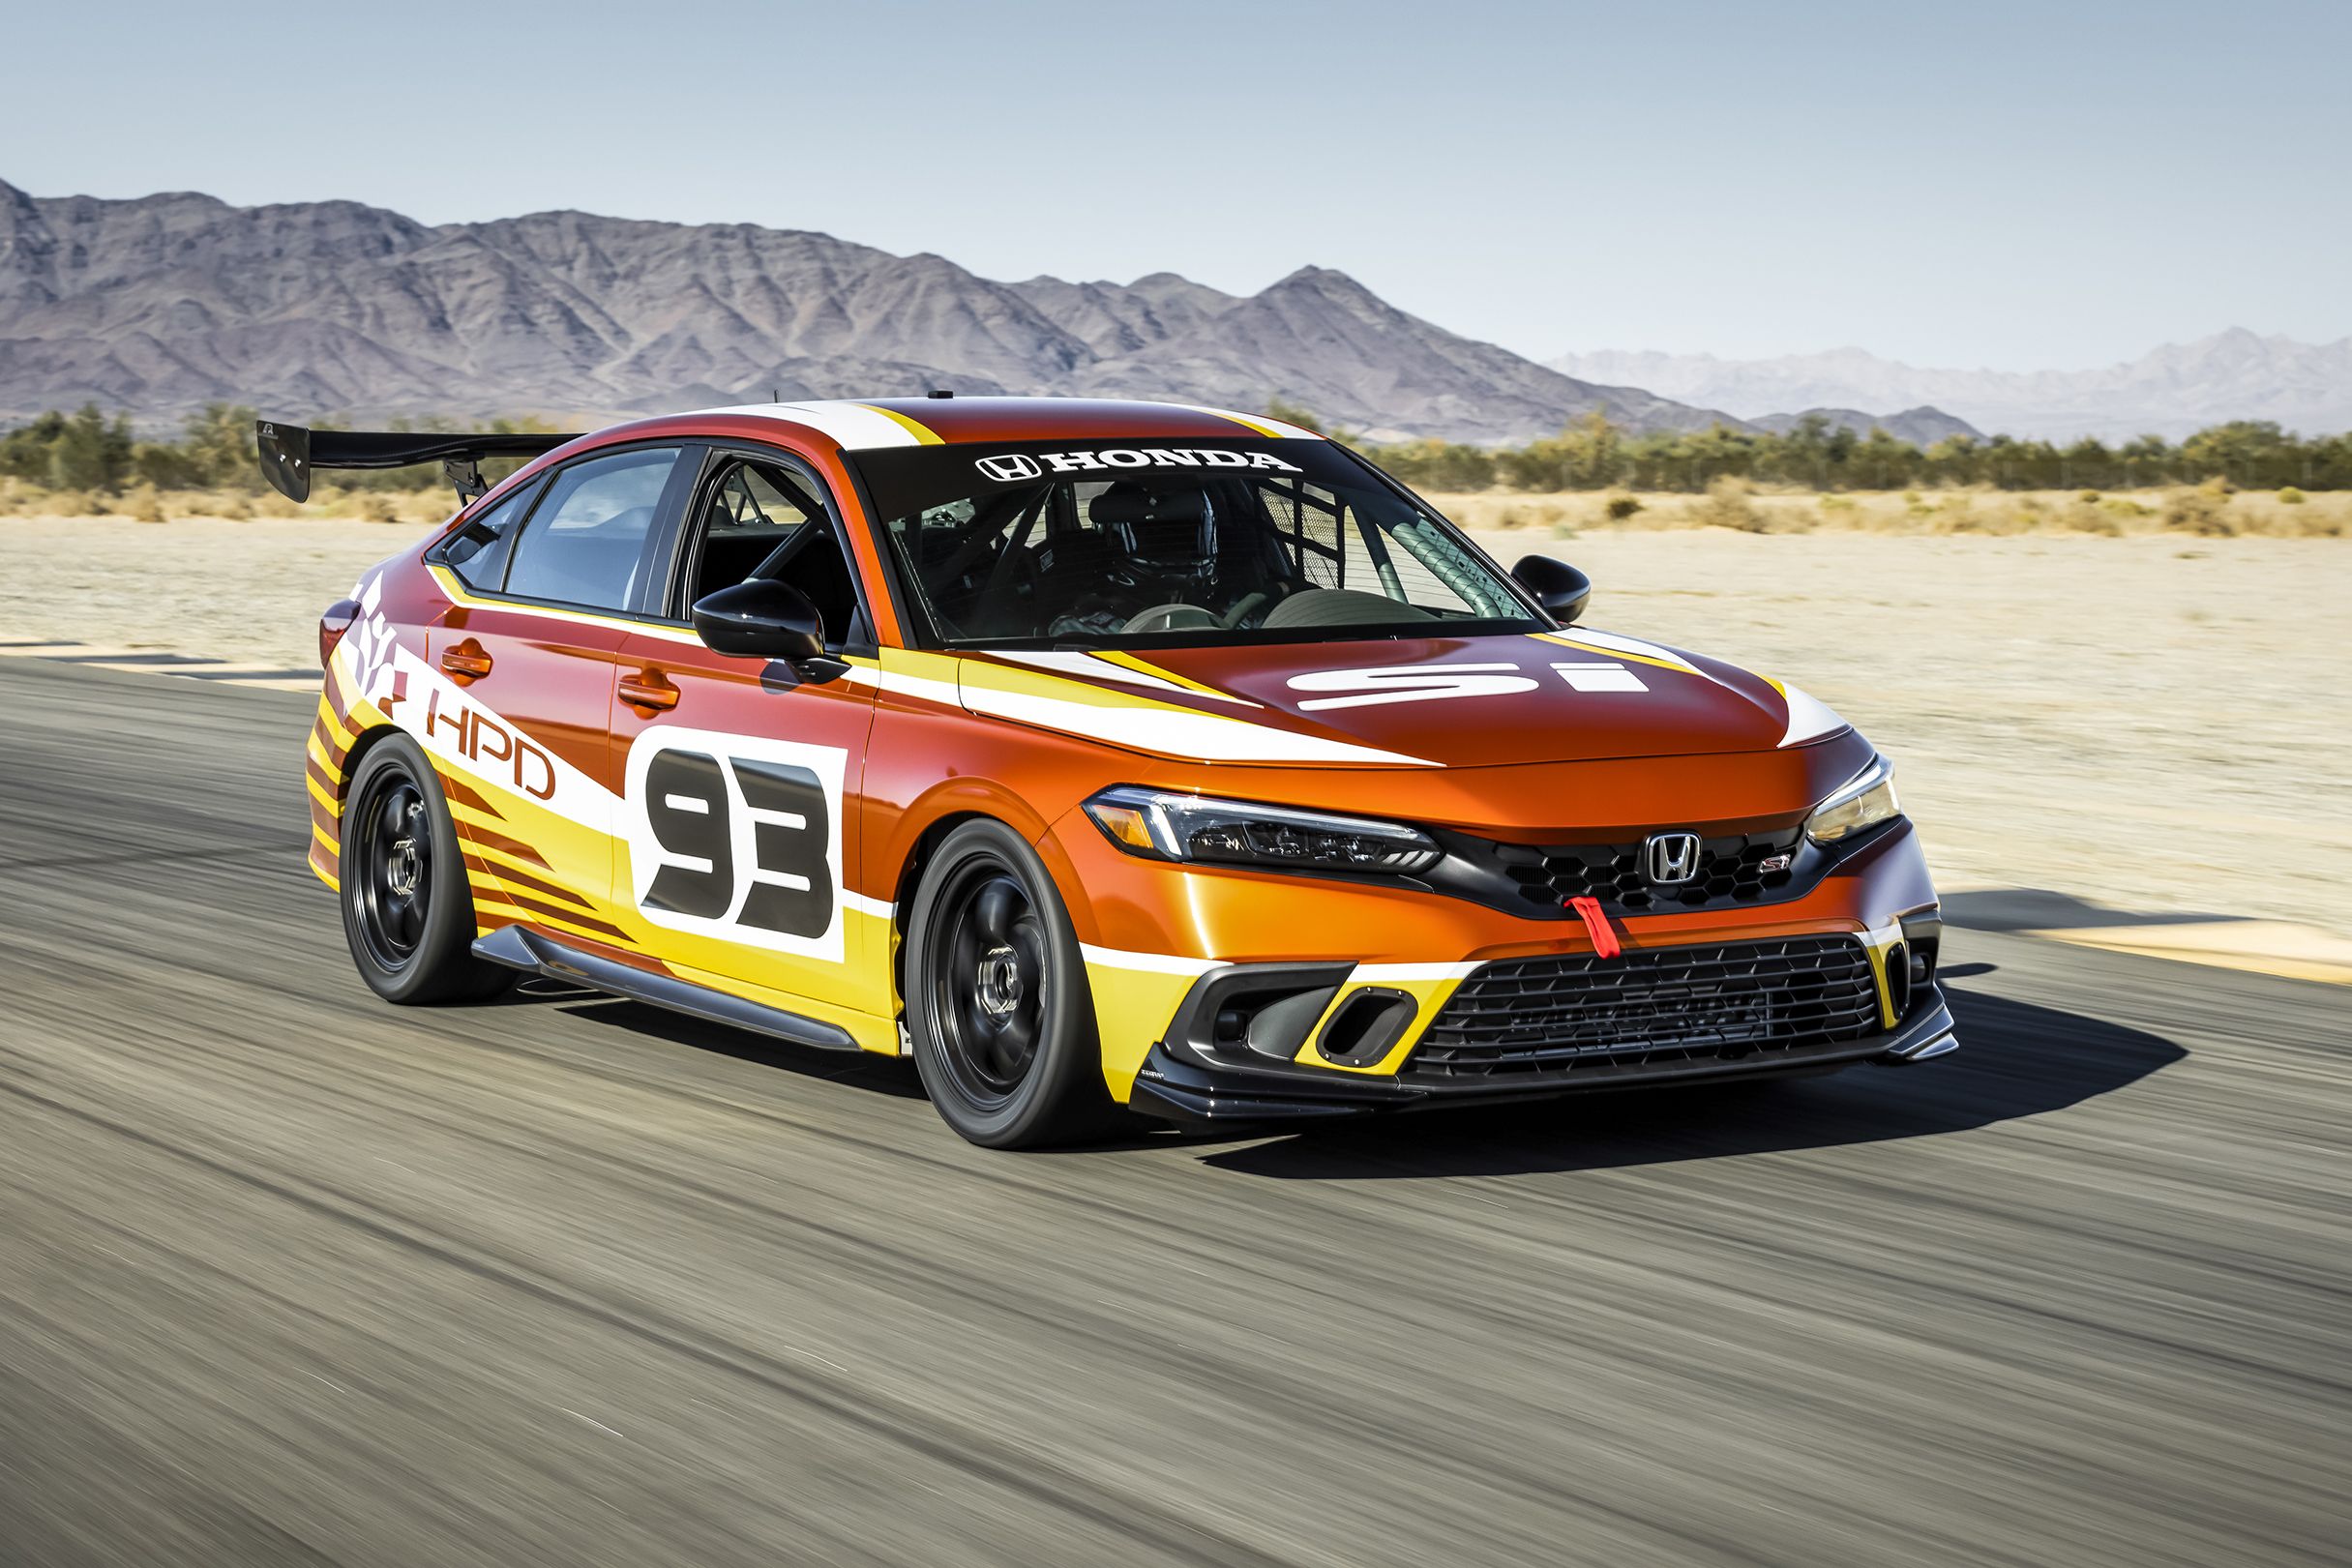 Skip Barber Partners with HPD to Run 2022 Civic SI Race Car in TC America | THE SHOP